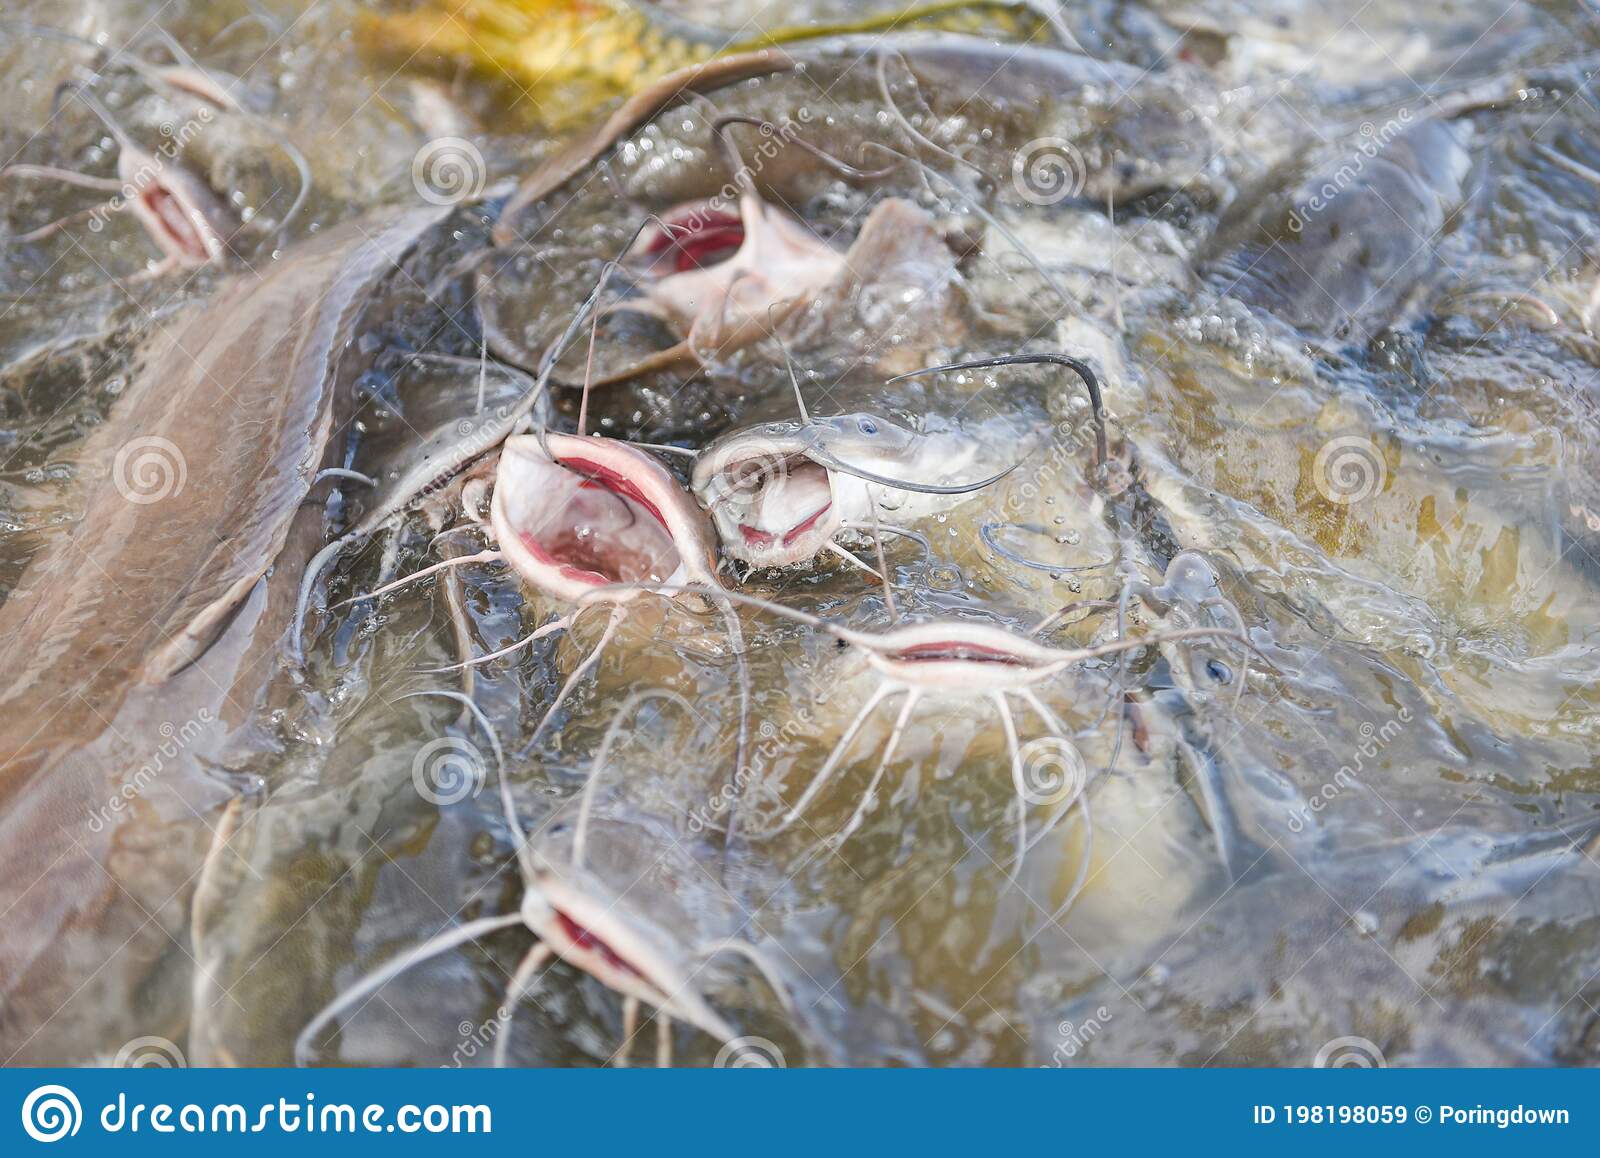 Catfish Eating From Feeding Food On Water Surface Ponds